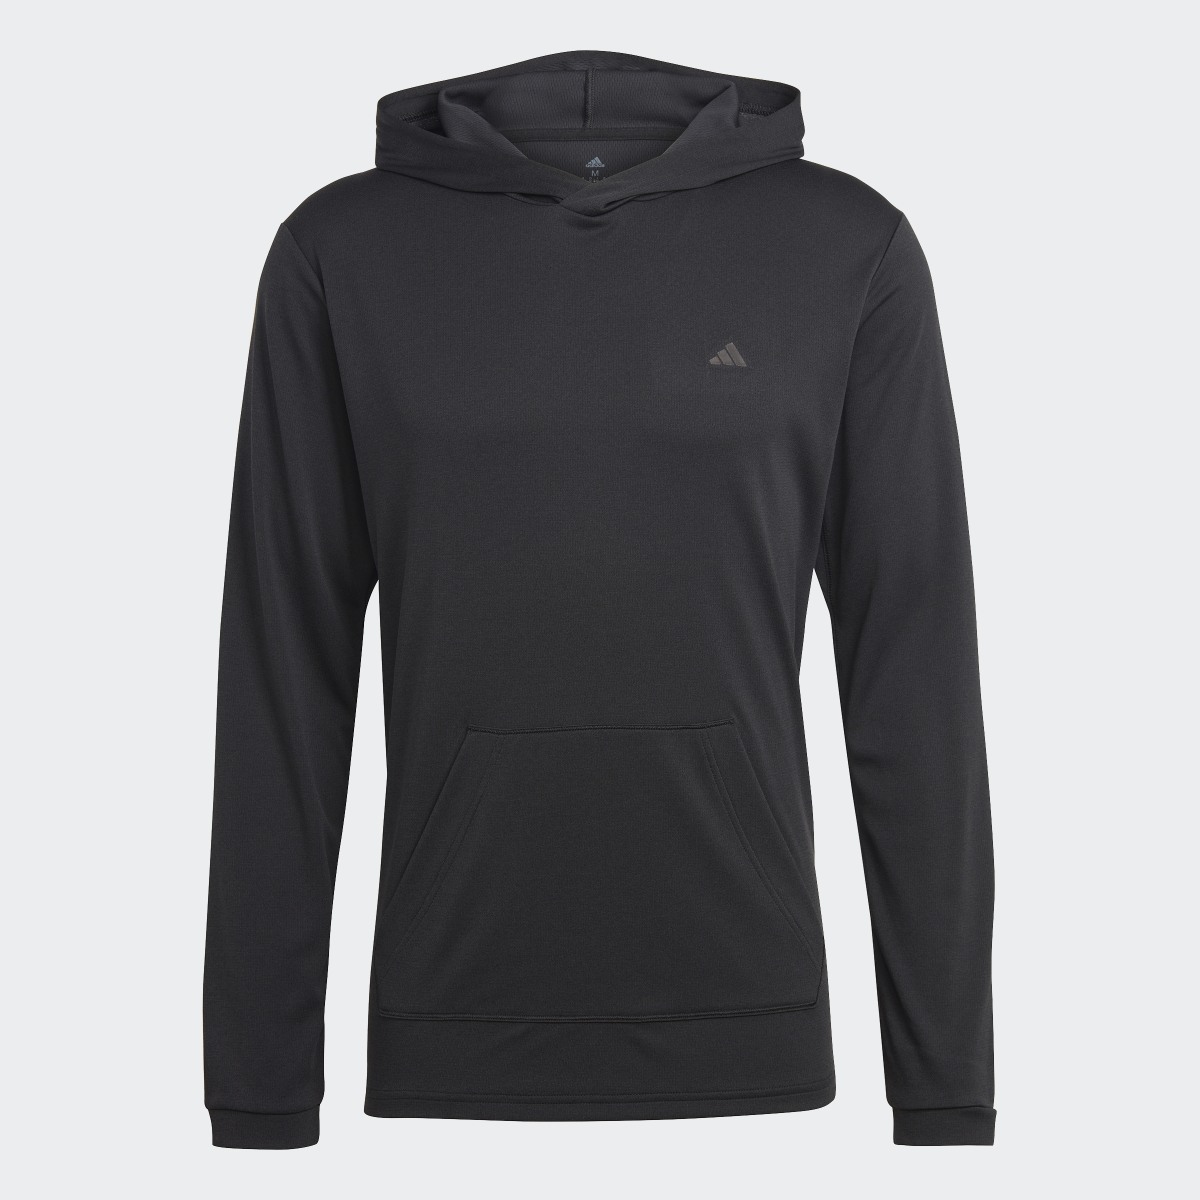 Adidas Train Essentials Made to be Remade Training Long Sleeve Hoodie. 6